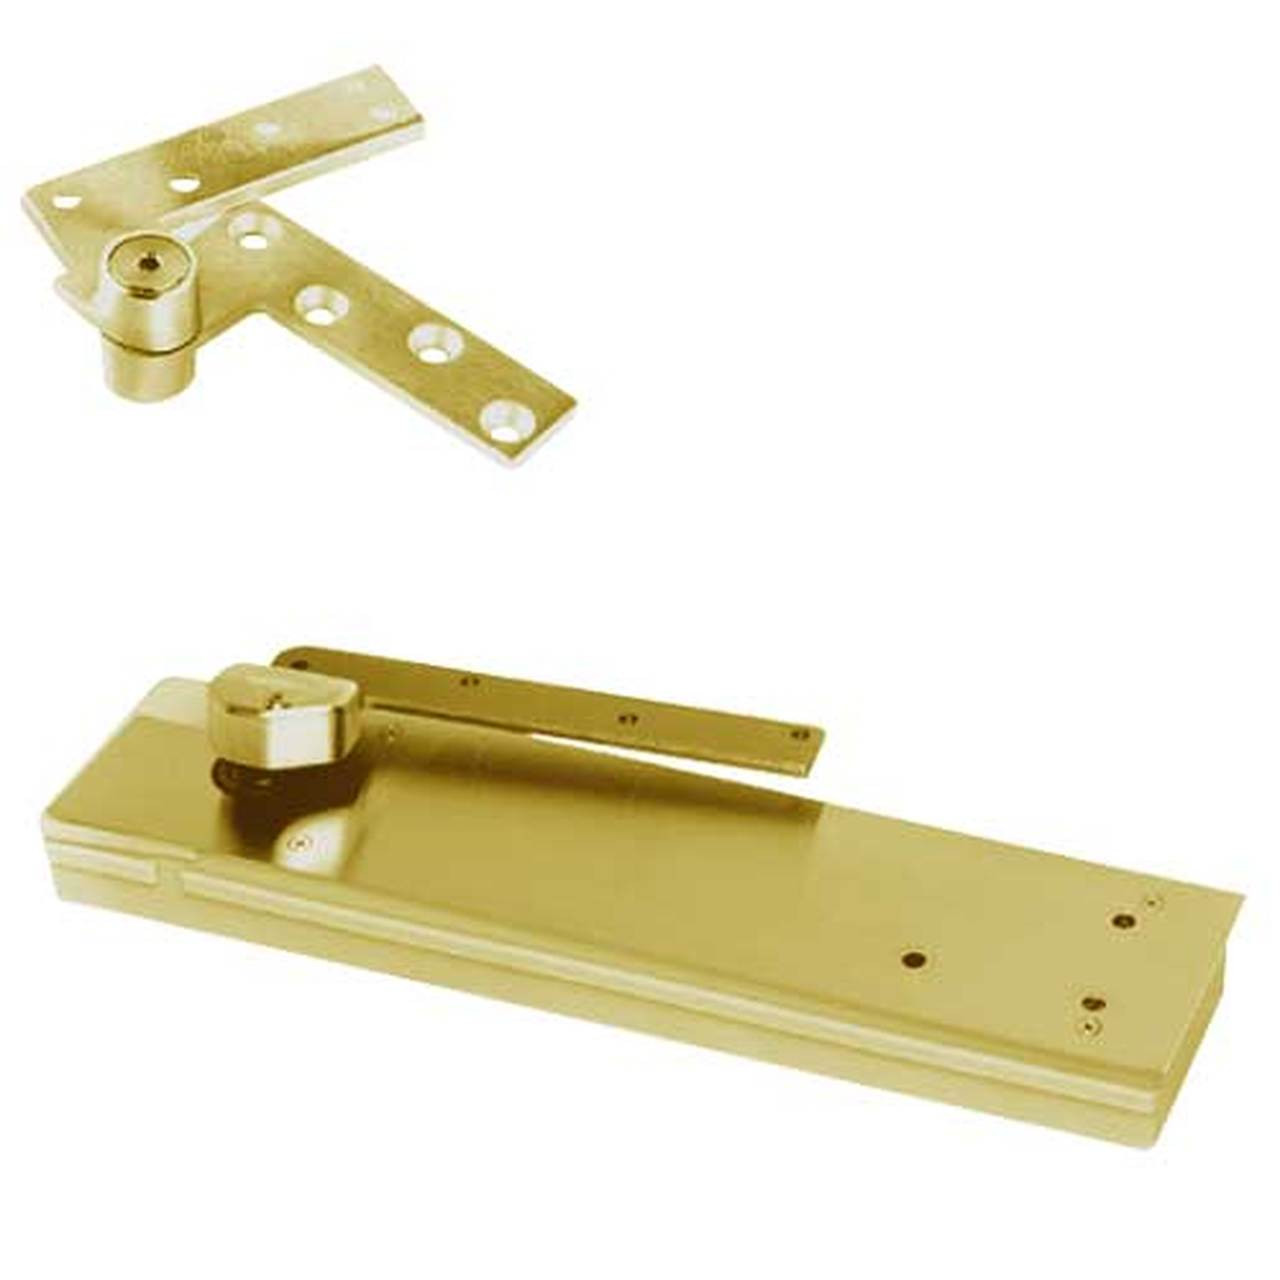 FHM5104NBC-LFP-LH-606 Rixson HM51 Series 3/4" Offset Hung Shallow Depth Floor Closers in Satin Brass Finish